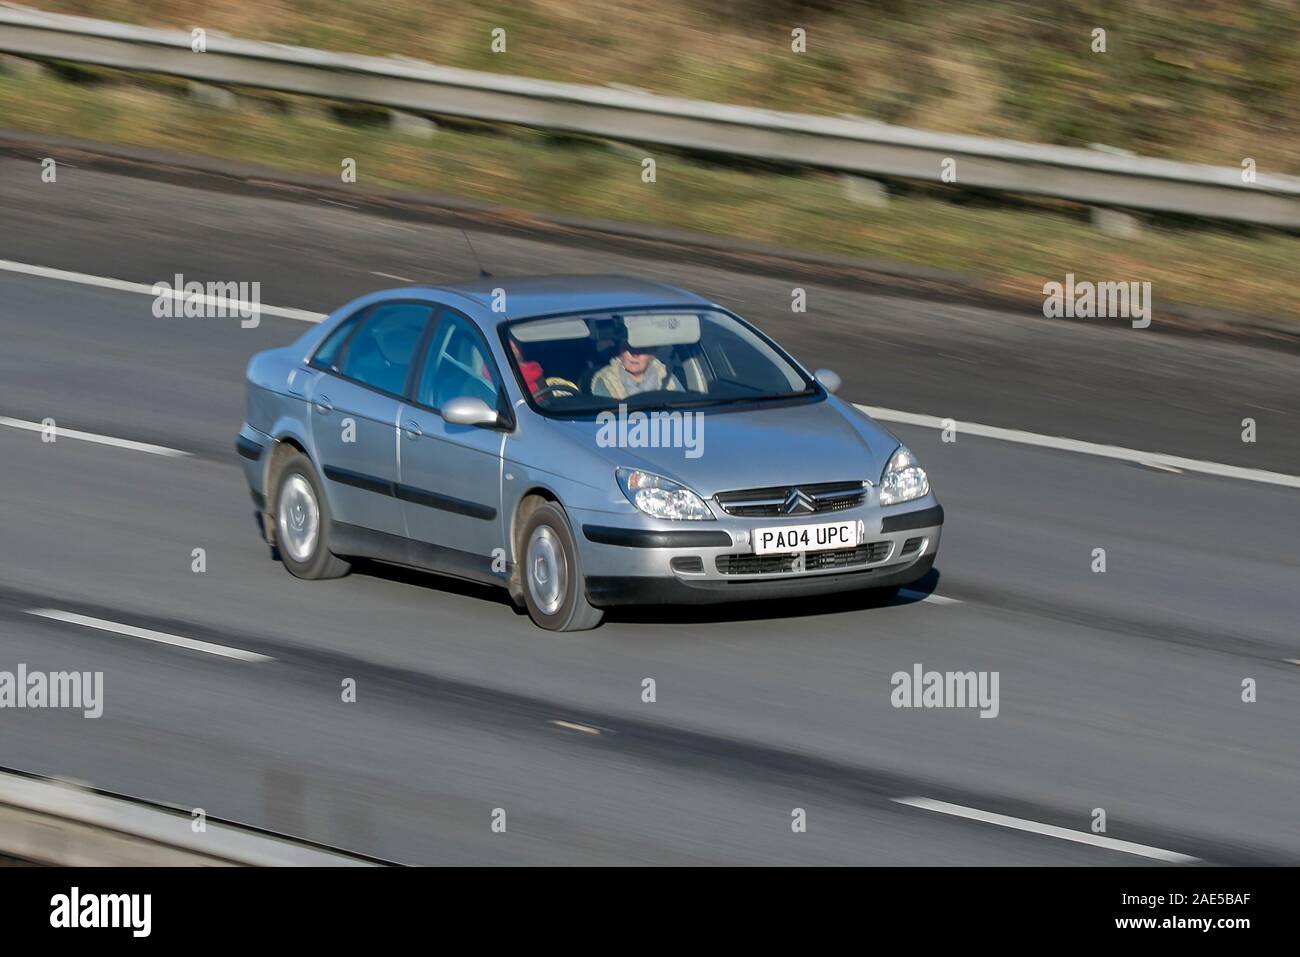 Citroën C5 HDI LX Auto; Blurred moving car  traveling at speed on the M61 motorway; Slow camera shutter speed exaggerating vehicle movement Stock Photo